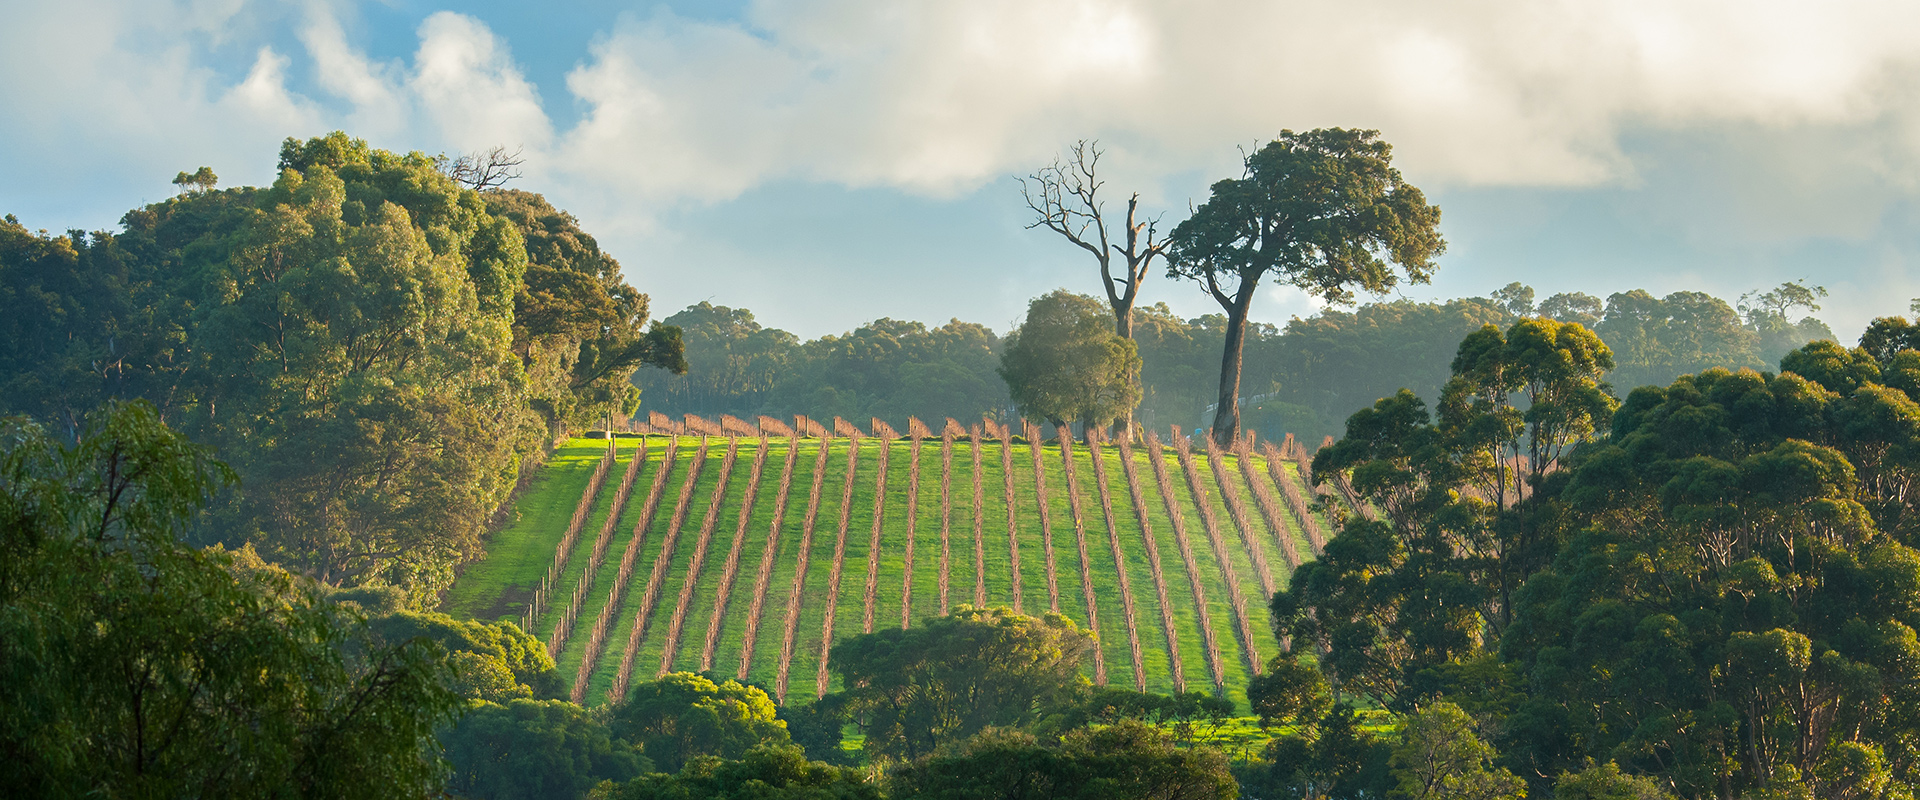 Margaret River winery fields on a hill